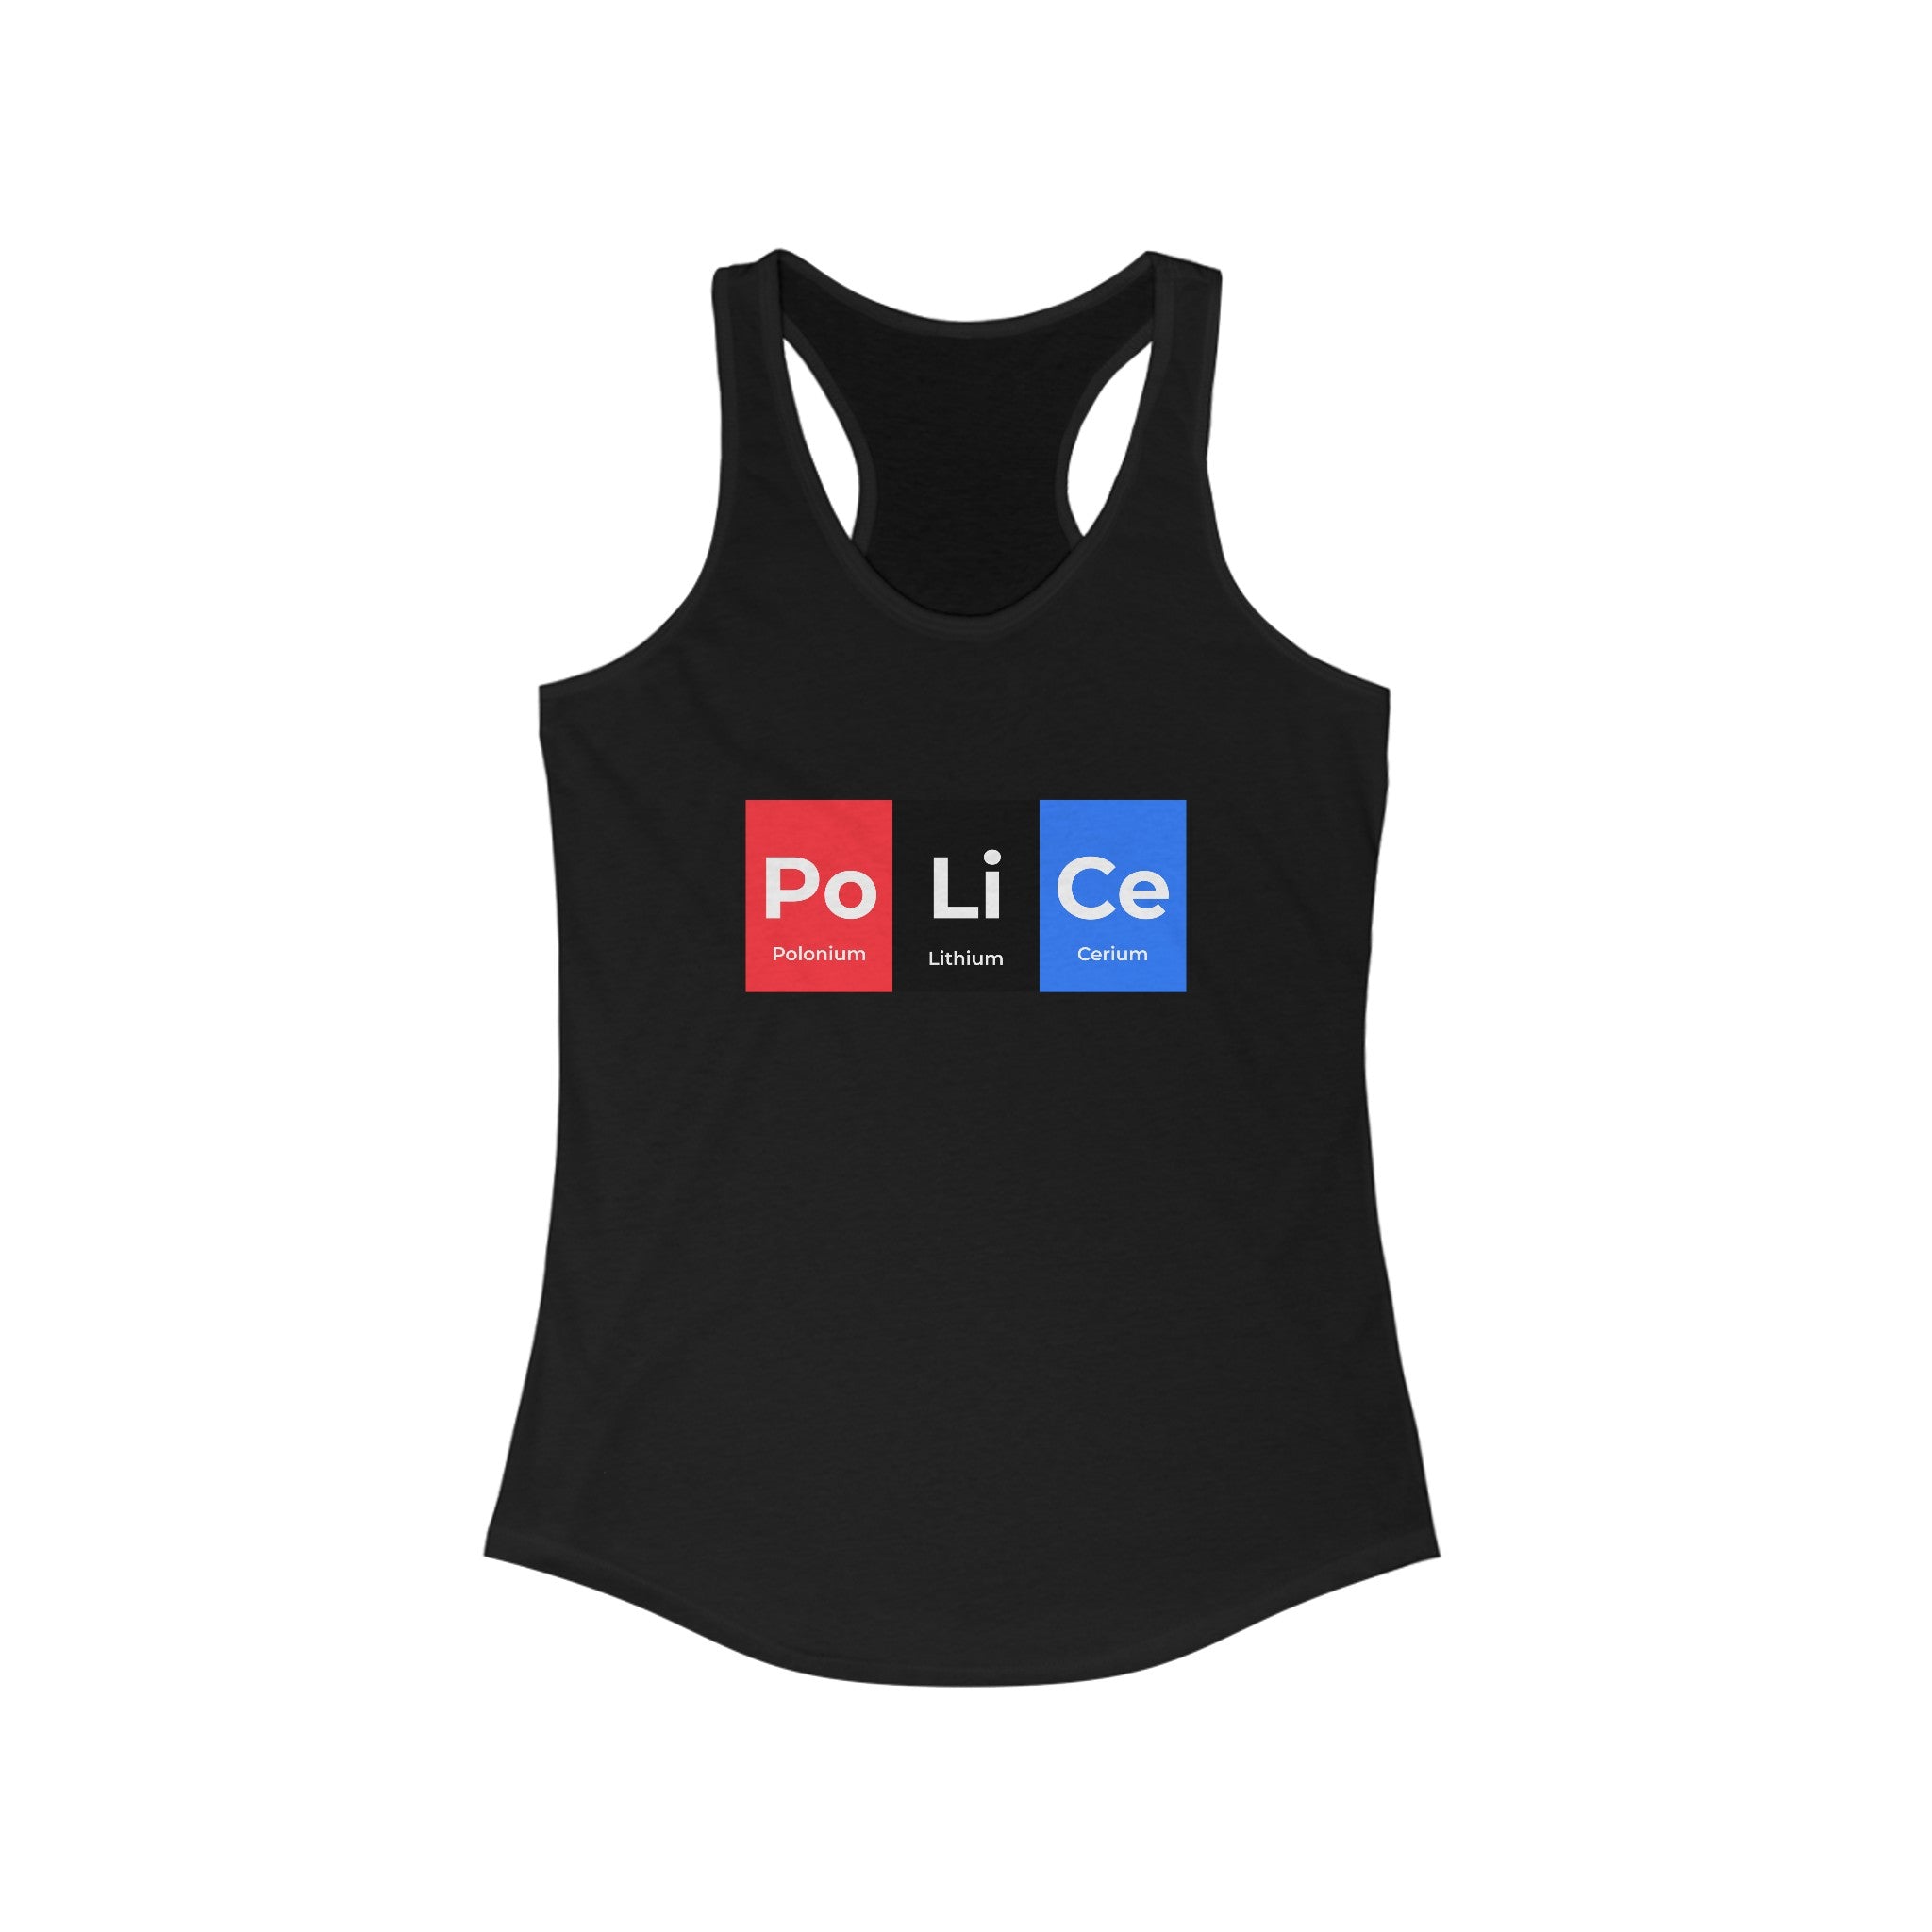 Po-Li-Ce - Women's Racerback Tank in black featuring a unique Po-Li-Ce design with the word "Police" spelled using periodic table elements Polonium (Po), Lithium (Li), and Cerium (Ce) in red, black, and blue blocks. Perfect for an active lifestyle.